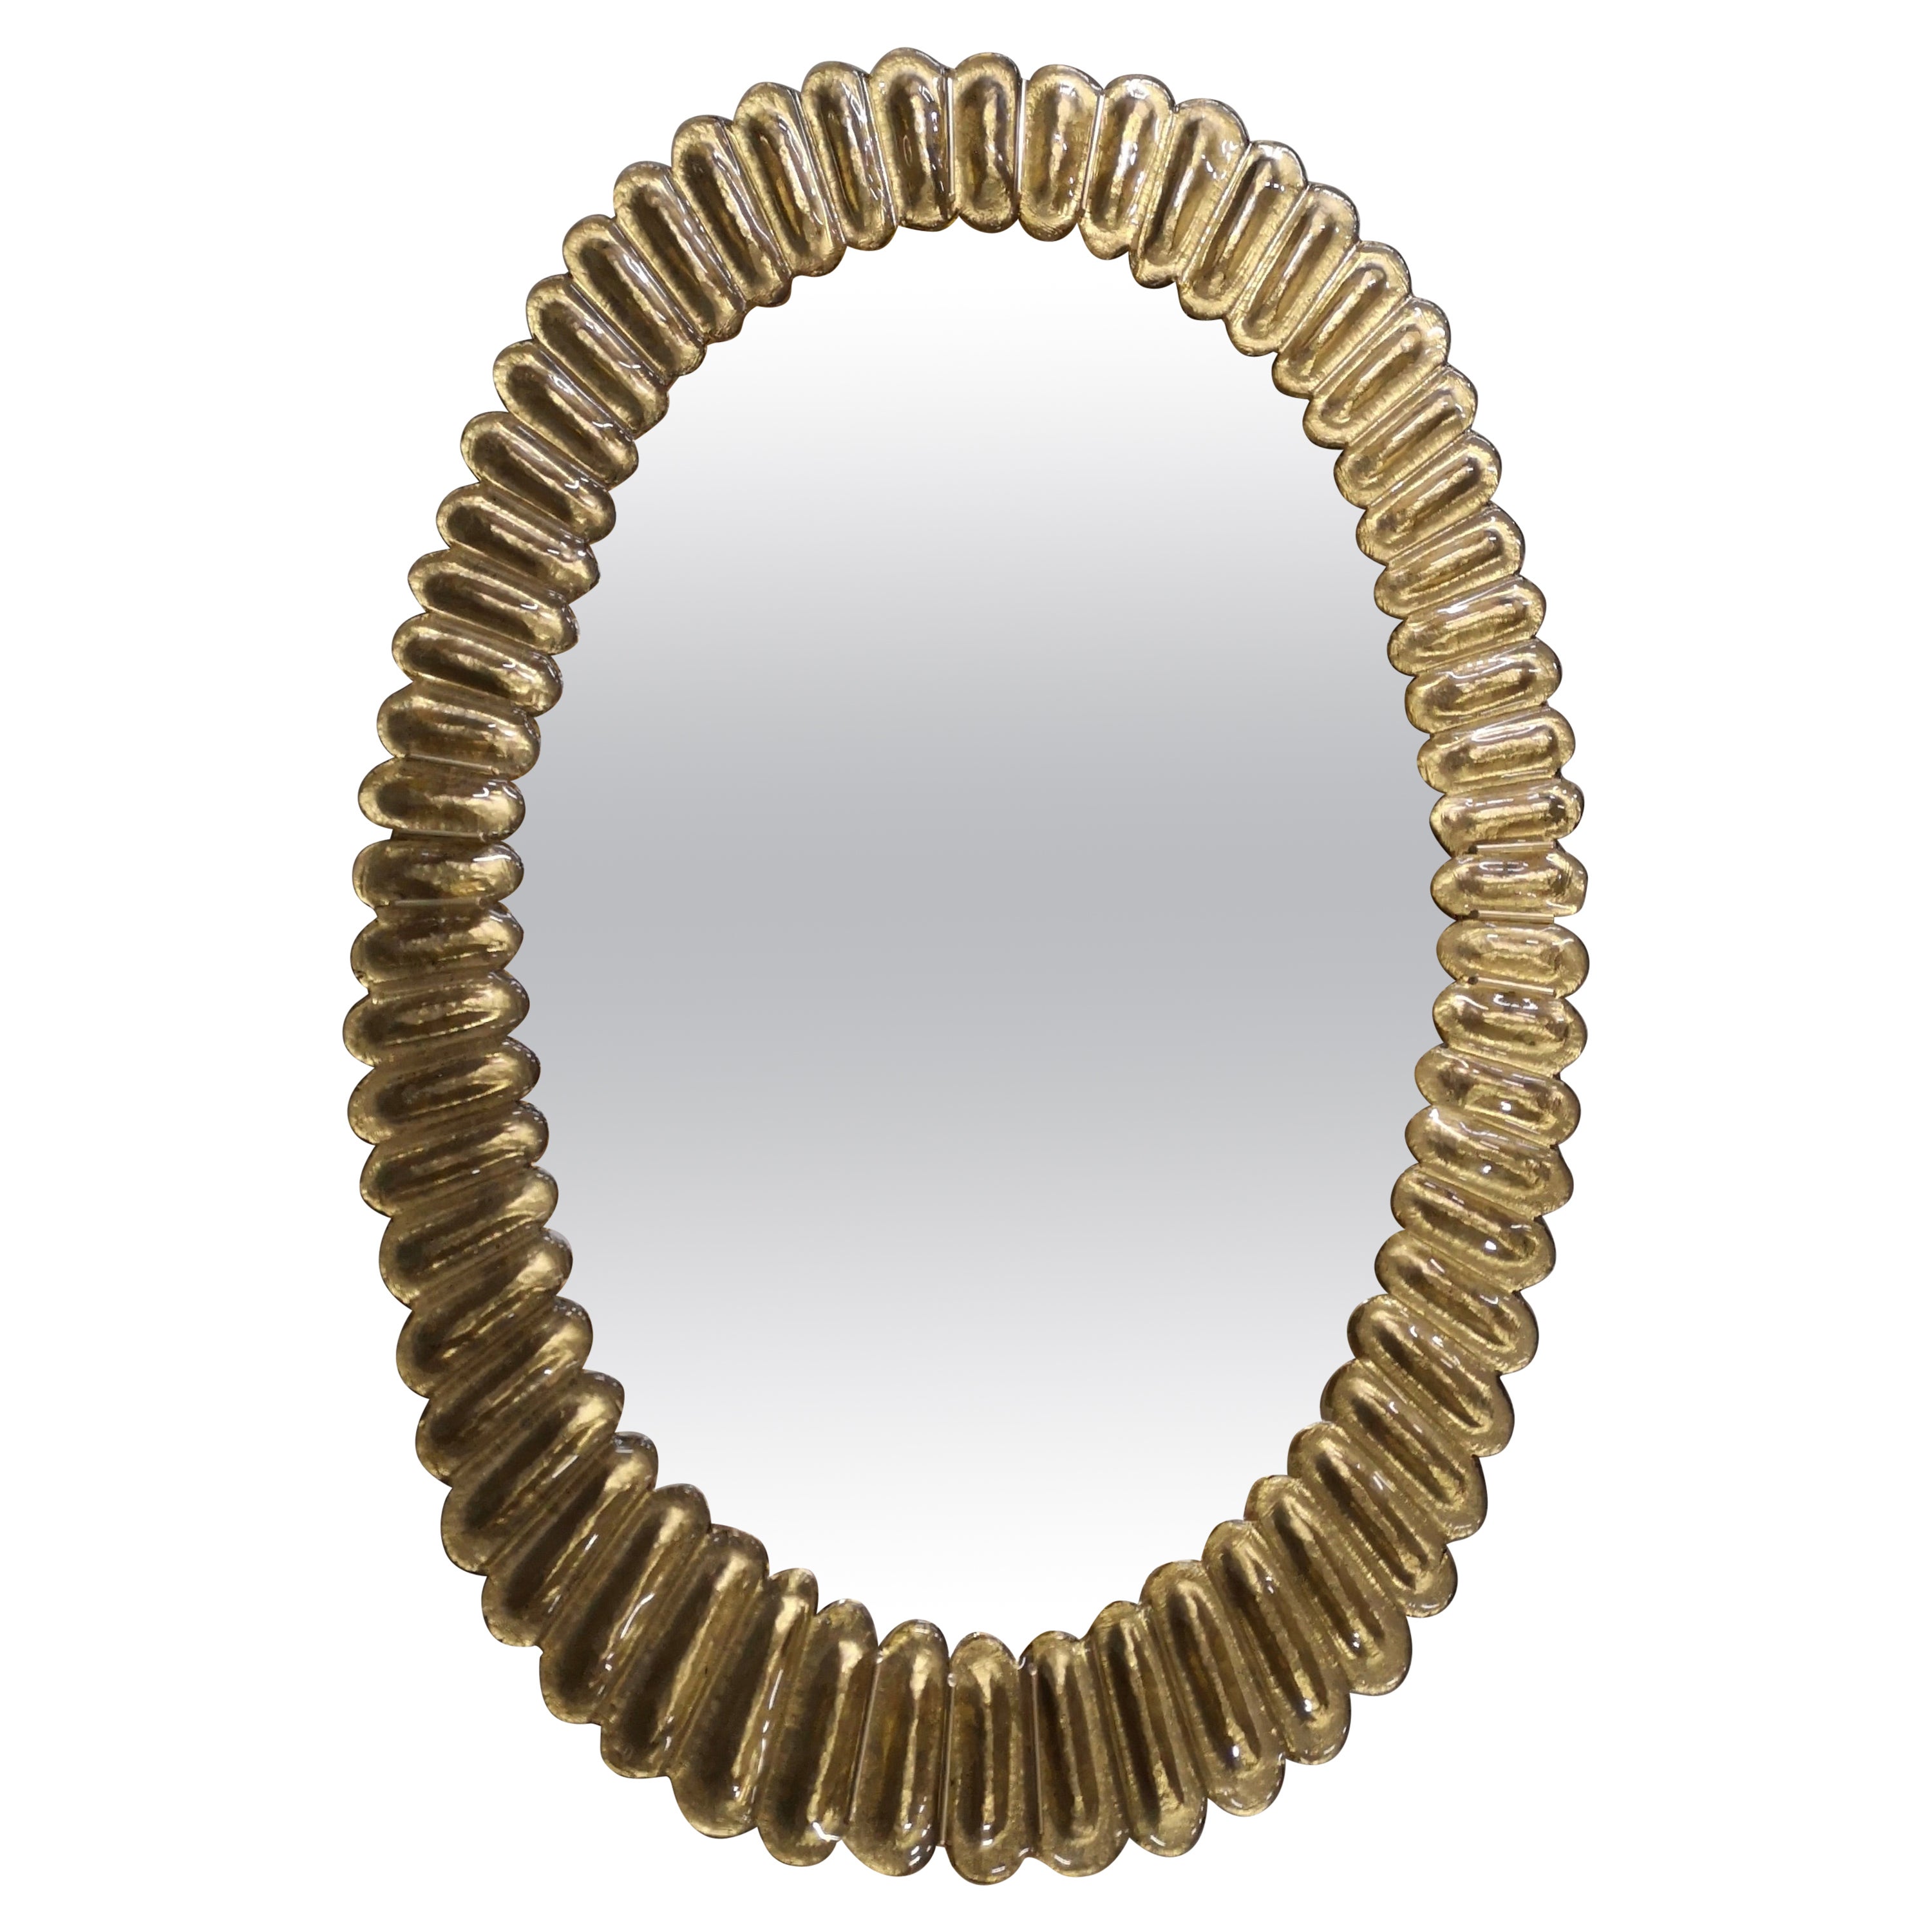 Midcentury Murano Oval Gold Art Glass and Brass Italian Wall Mirror, 2000 For Sale